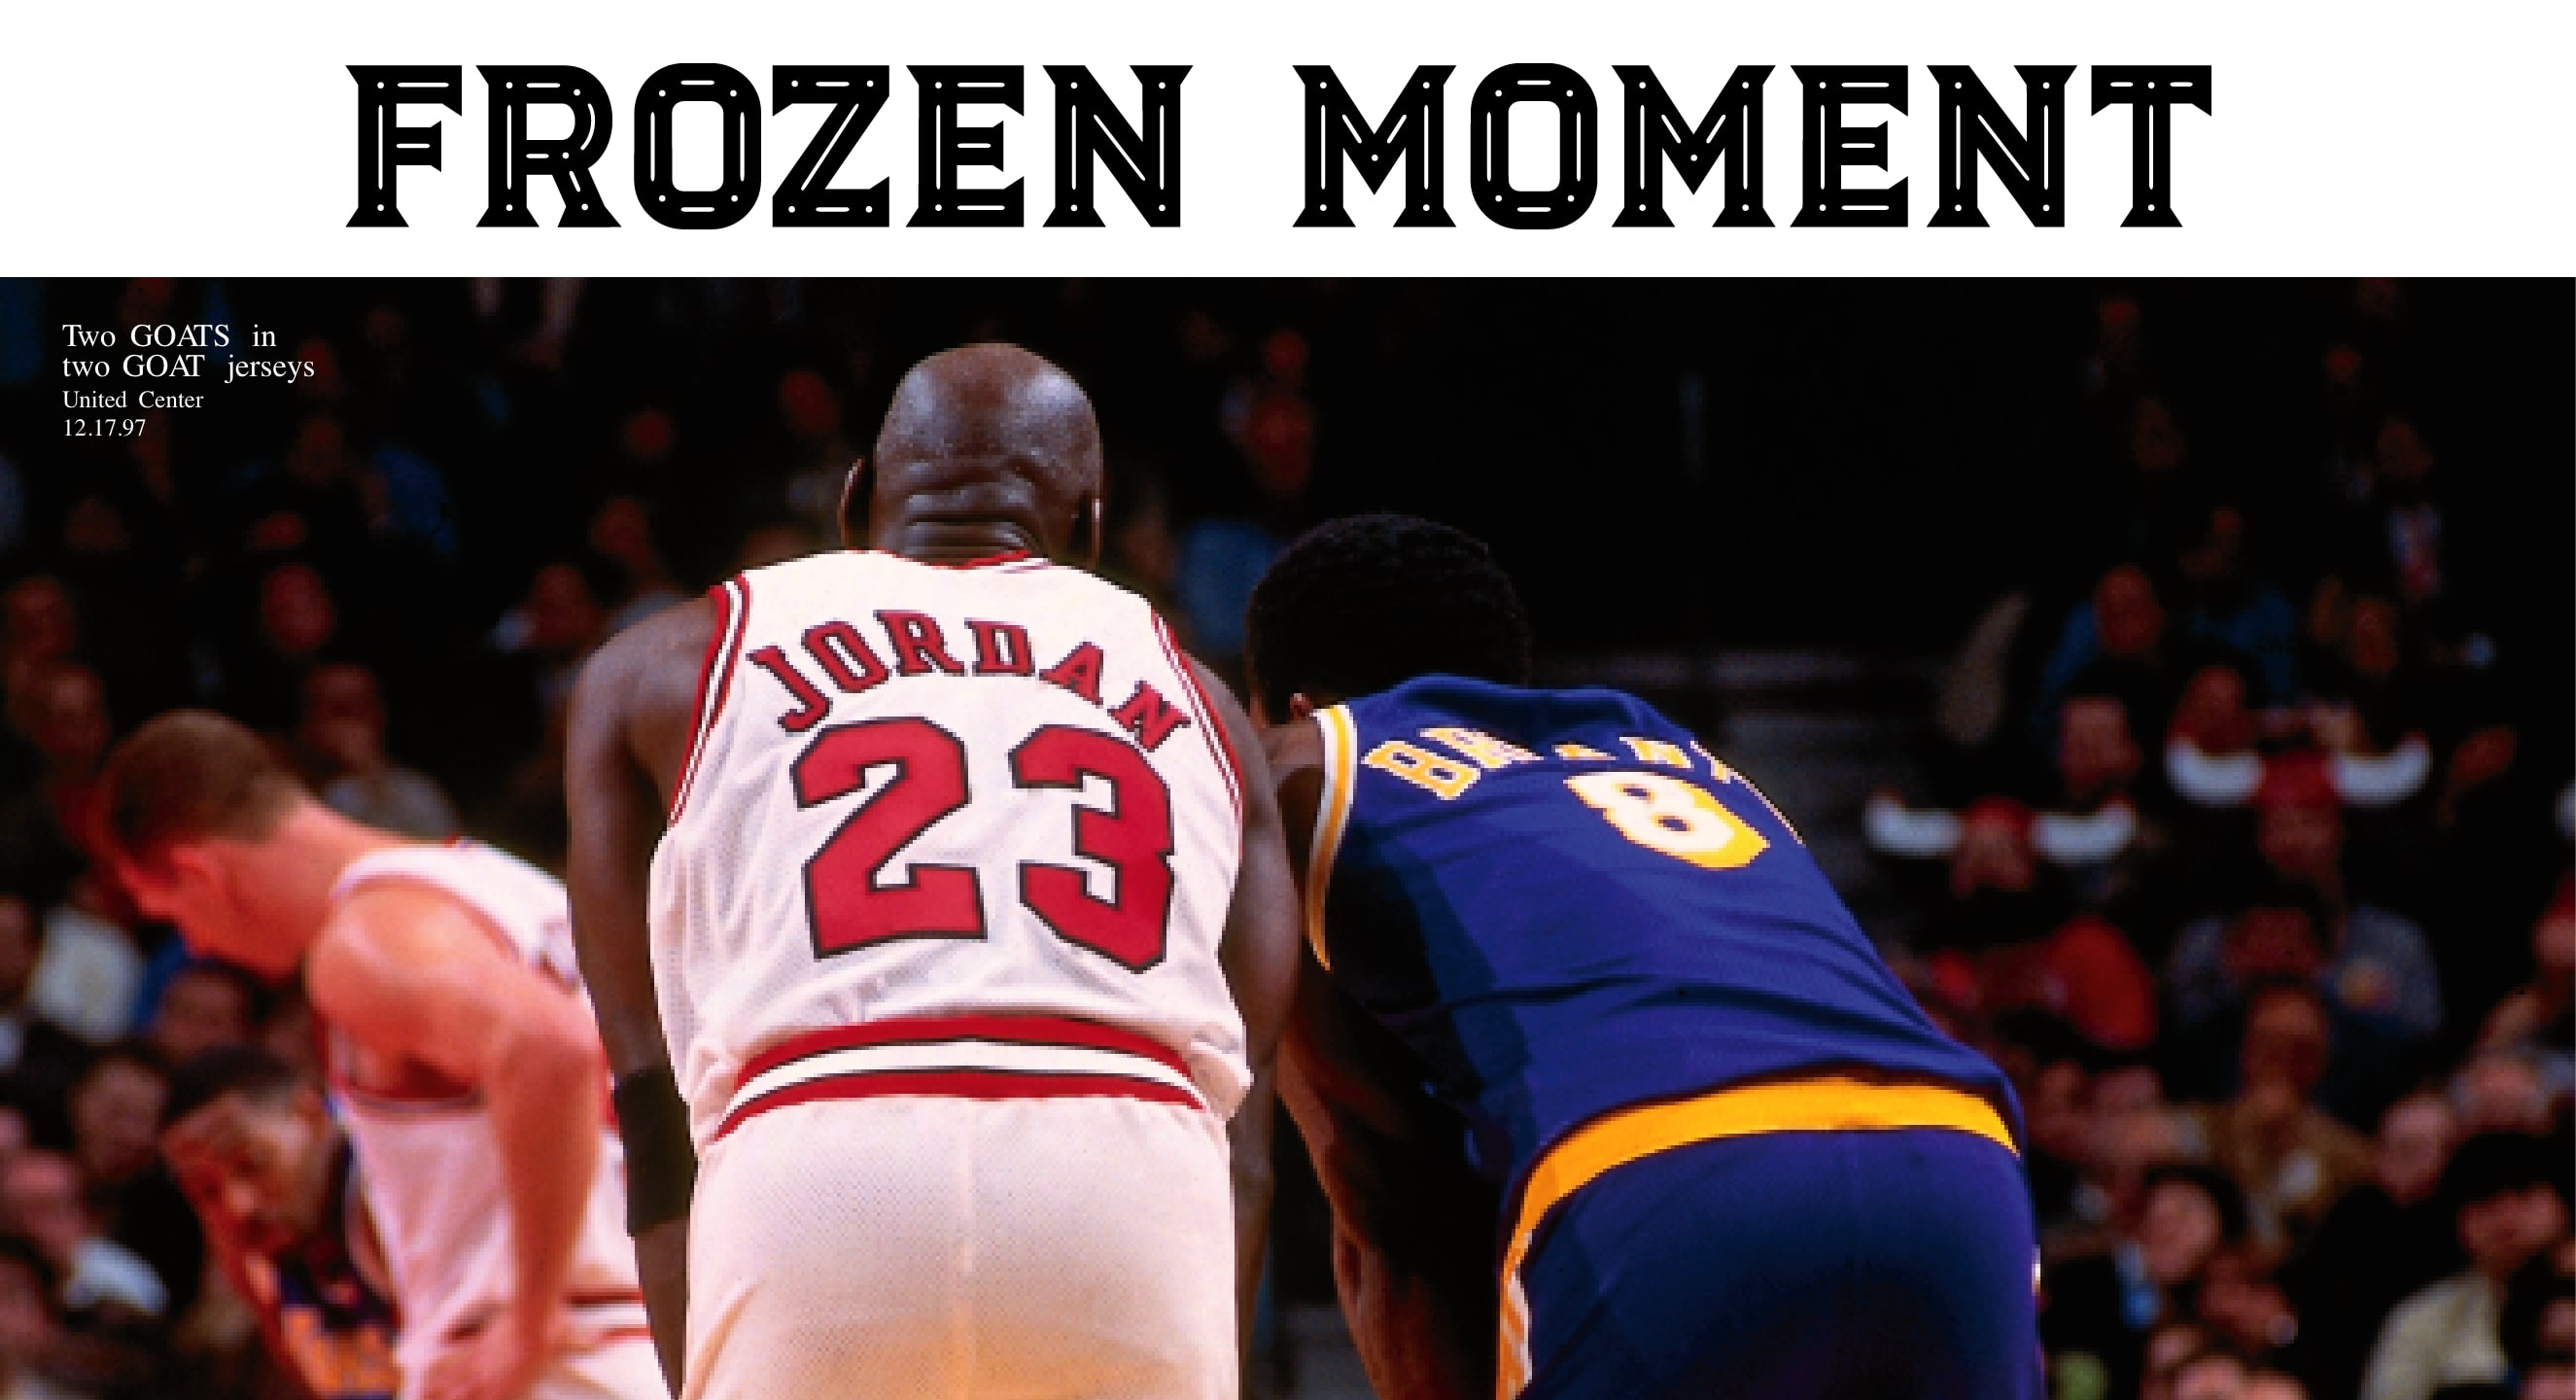 frozen moment - image of Jordan and Bryant